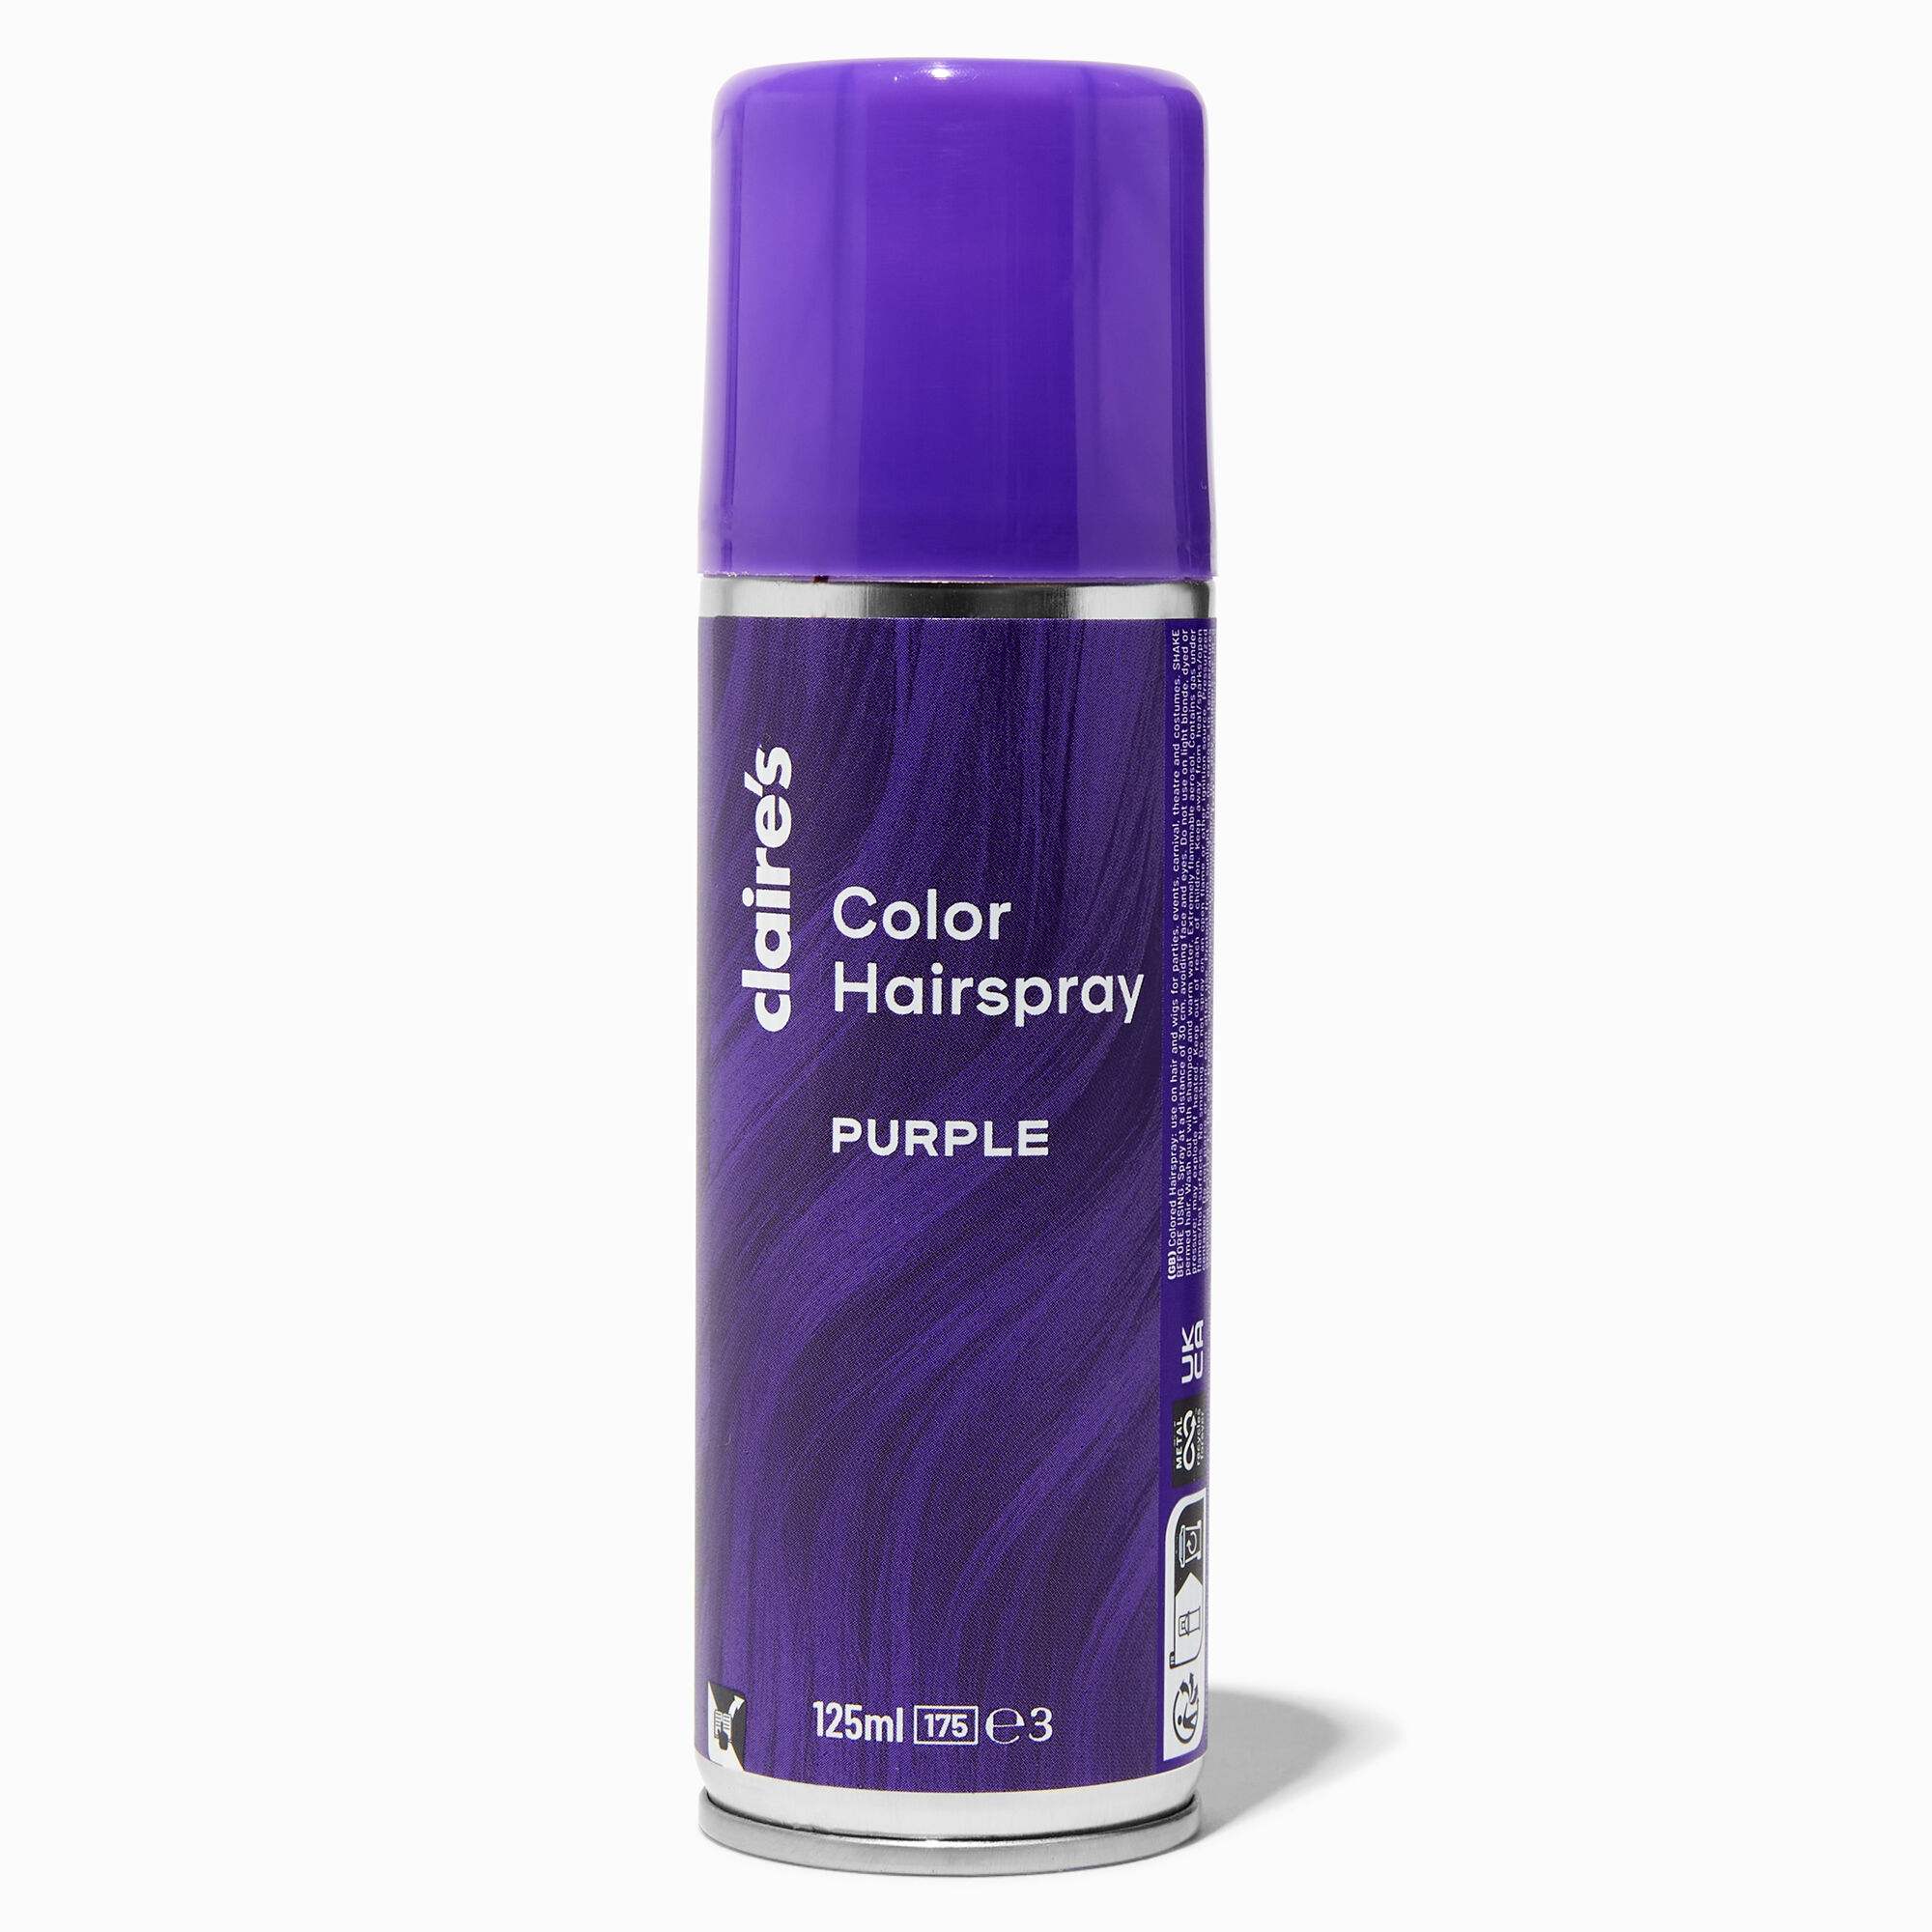 View Claires Color Hairspray Purple information